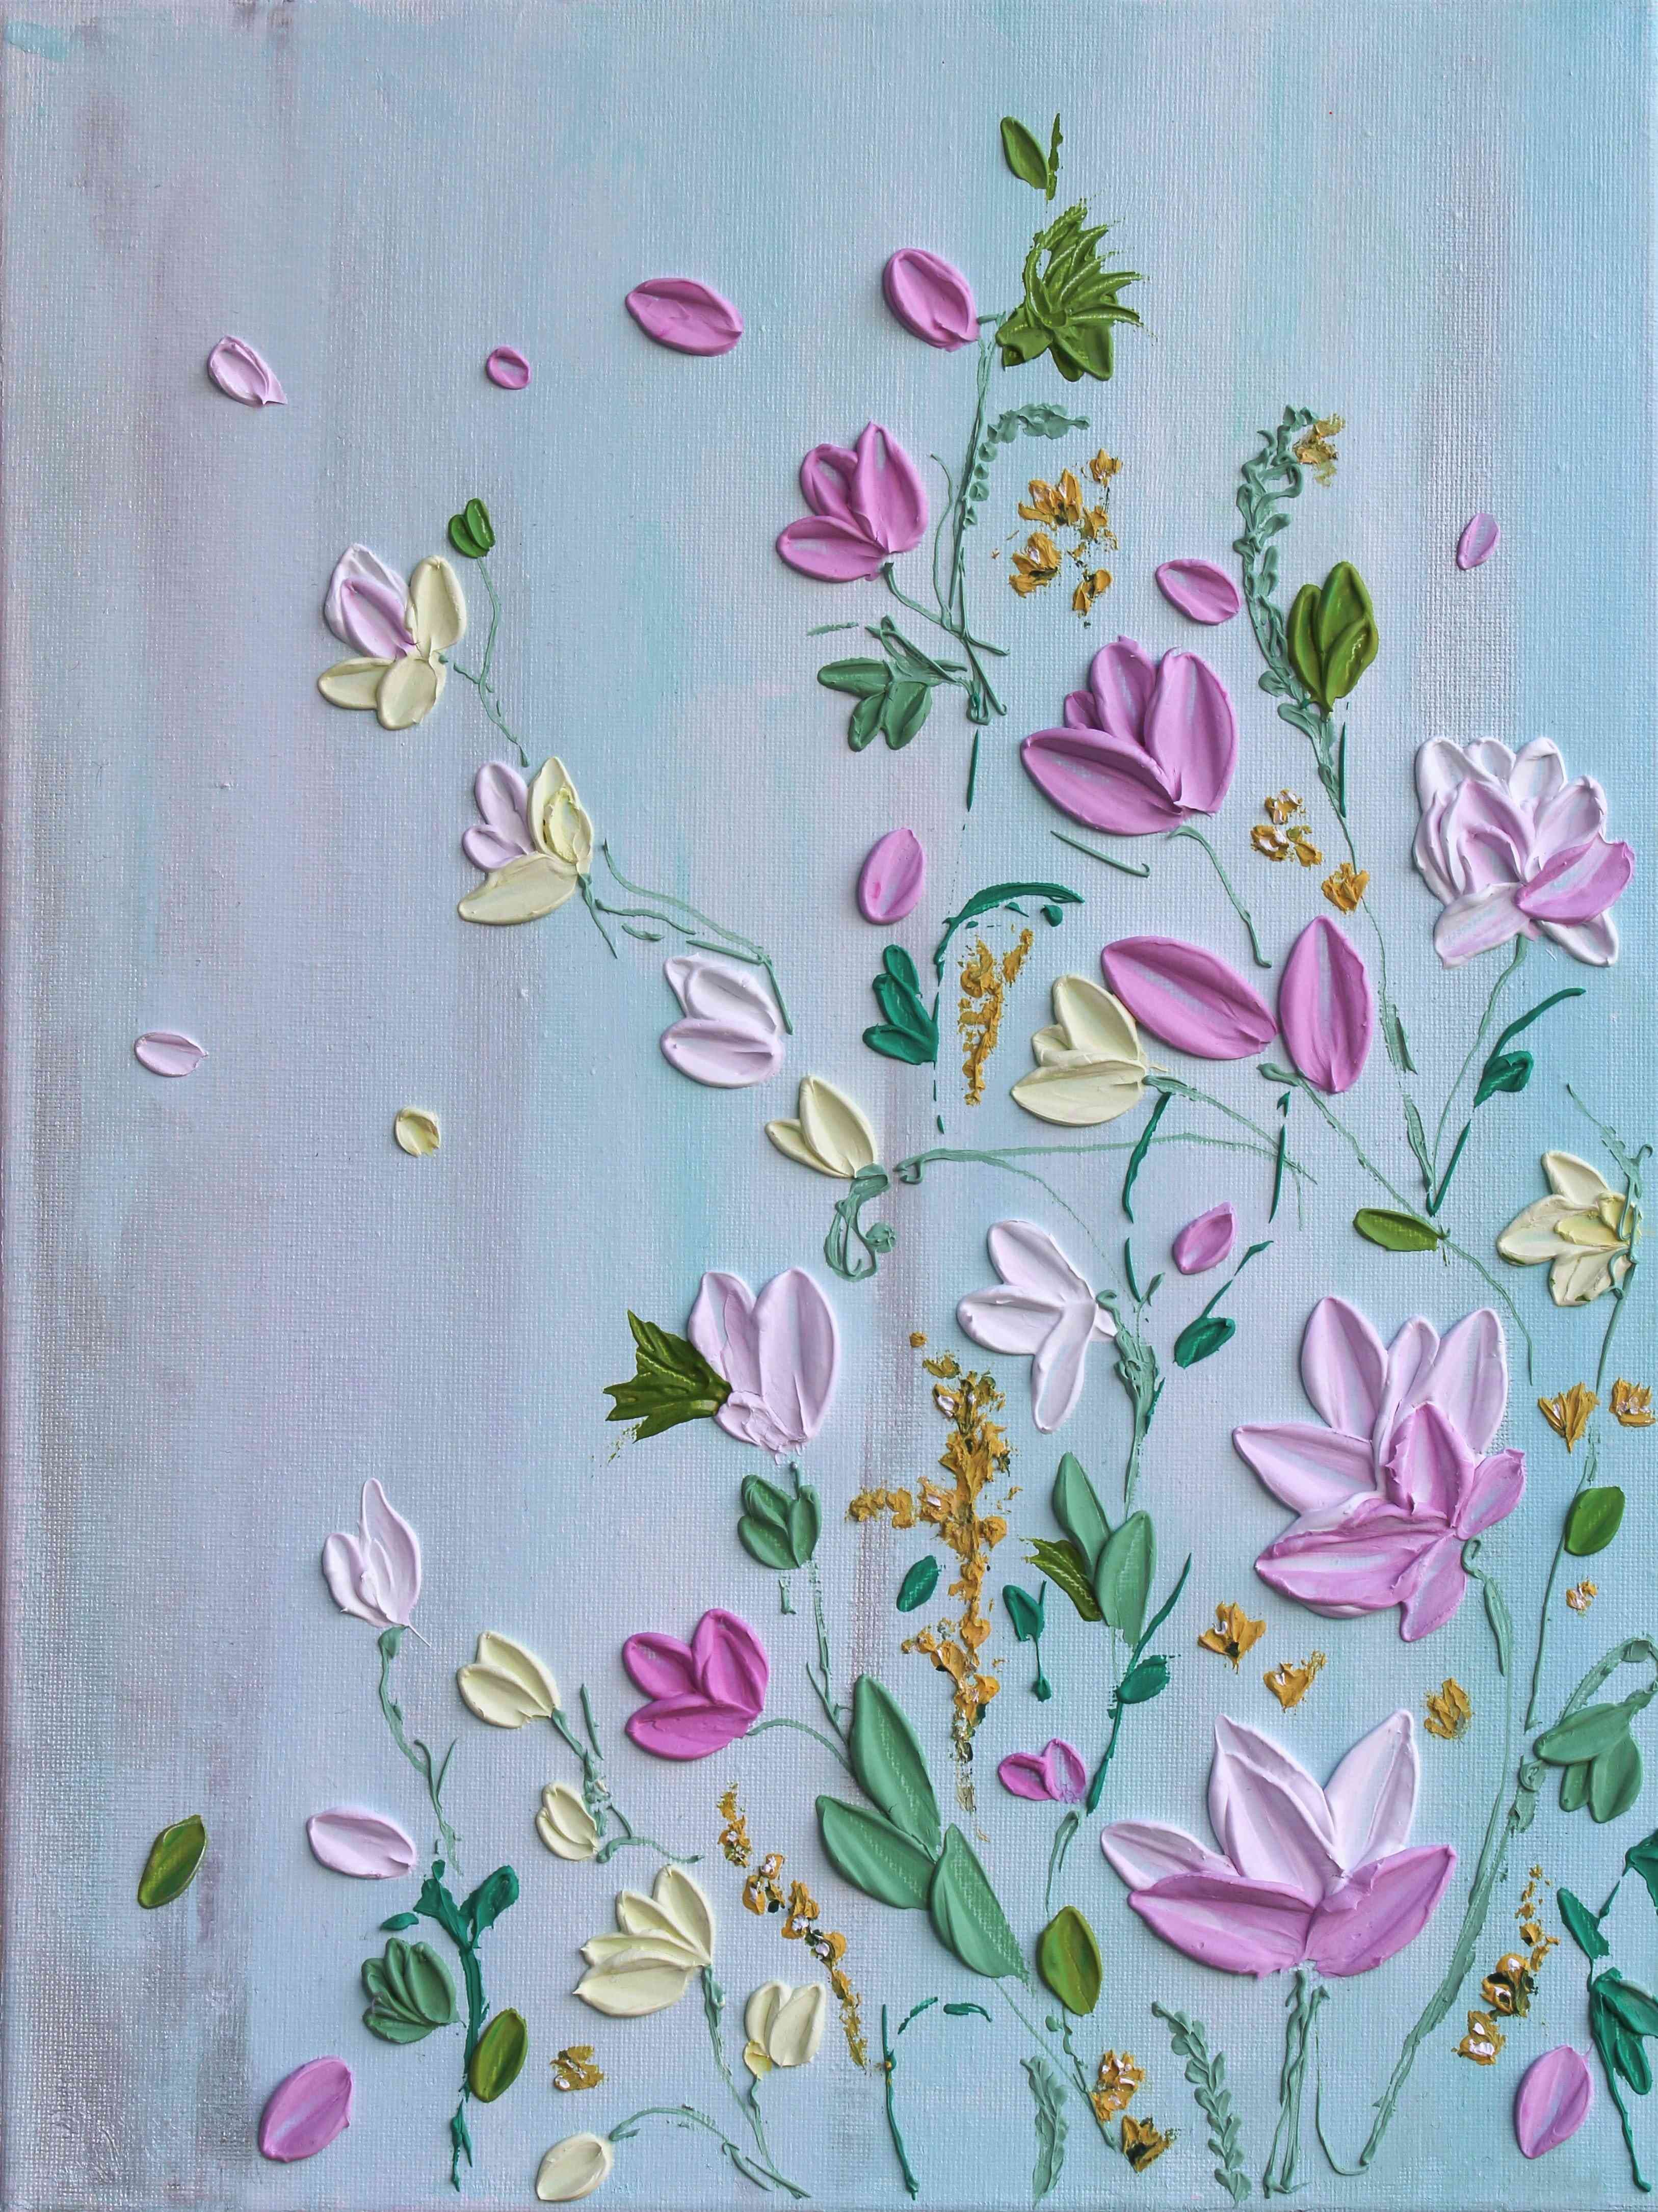 Turquoise - Mixed Media Floral Art